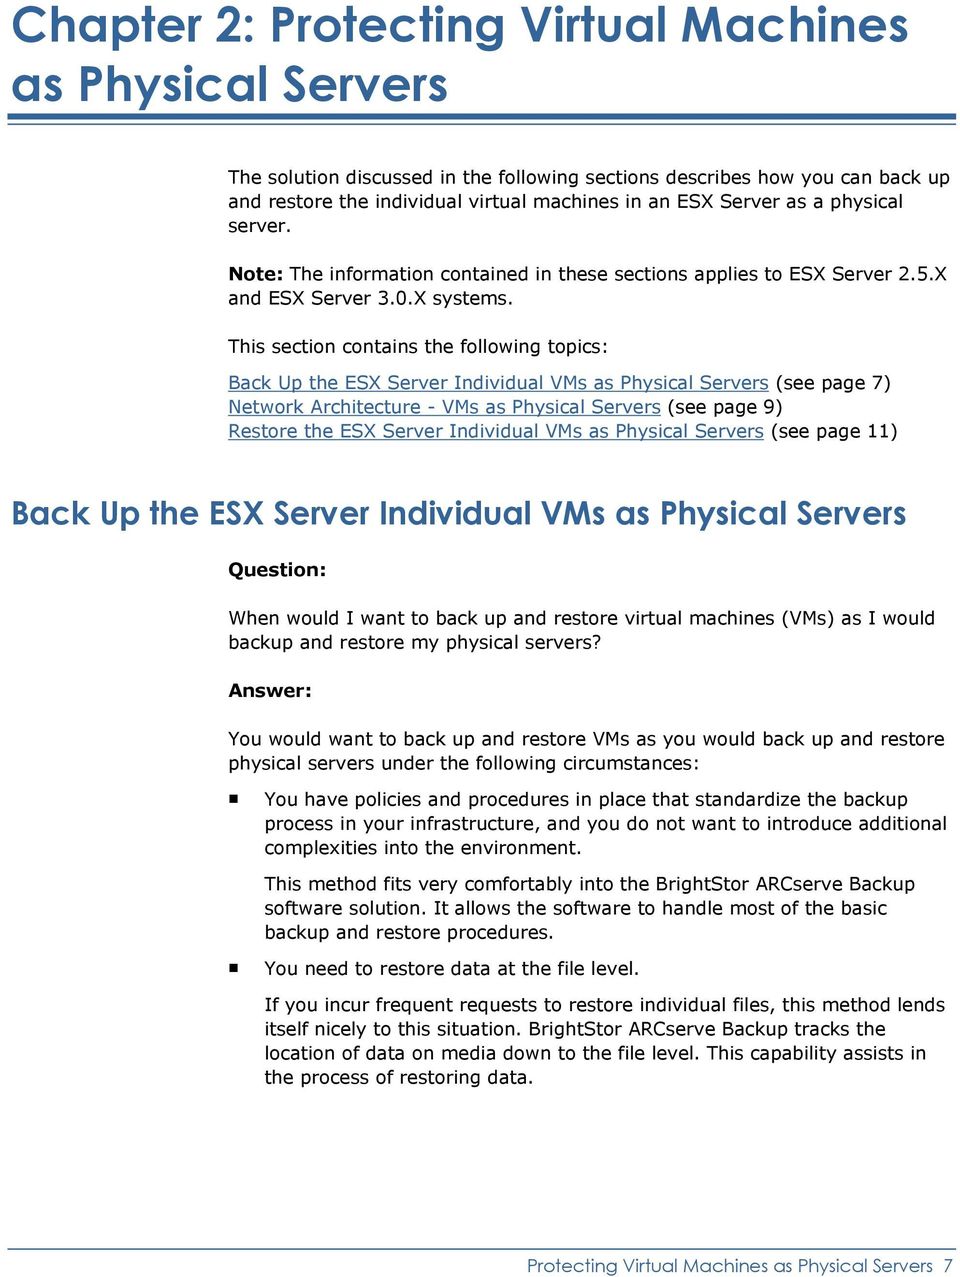 This section contains the following topics: Back Up the ESX Server Individual VMs as Physical Servers (see page 7) Network Architecture - VMs as Physical Servers (see page 9) Restore the ESX Server